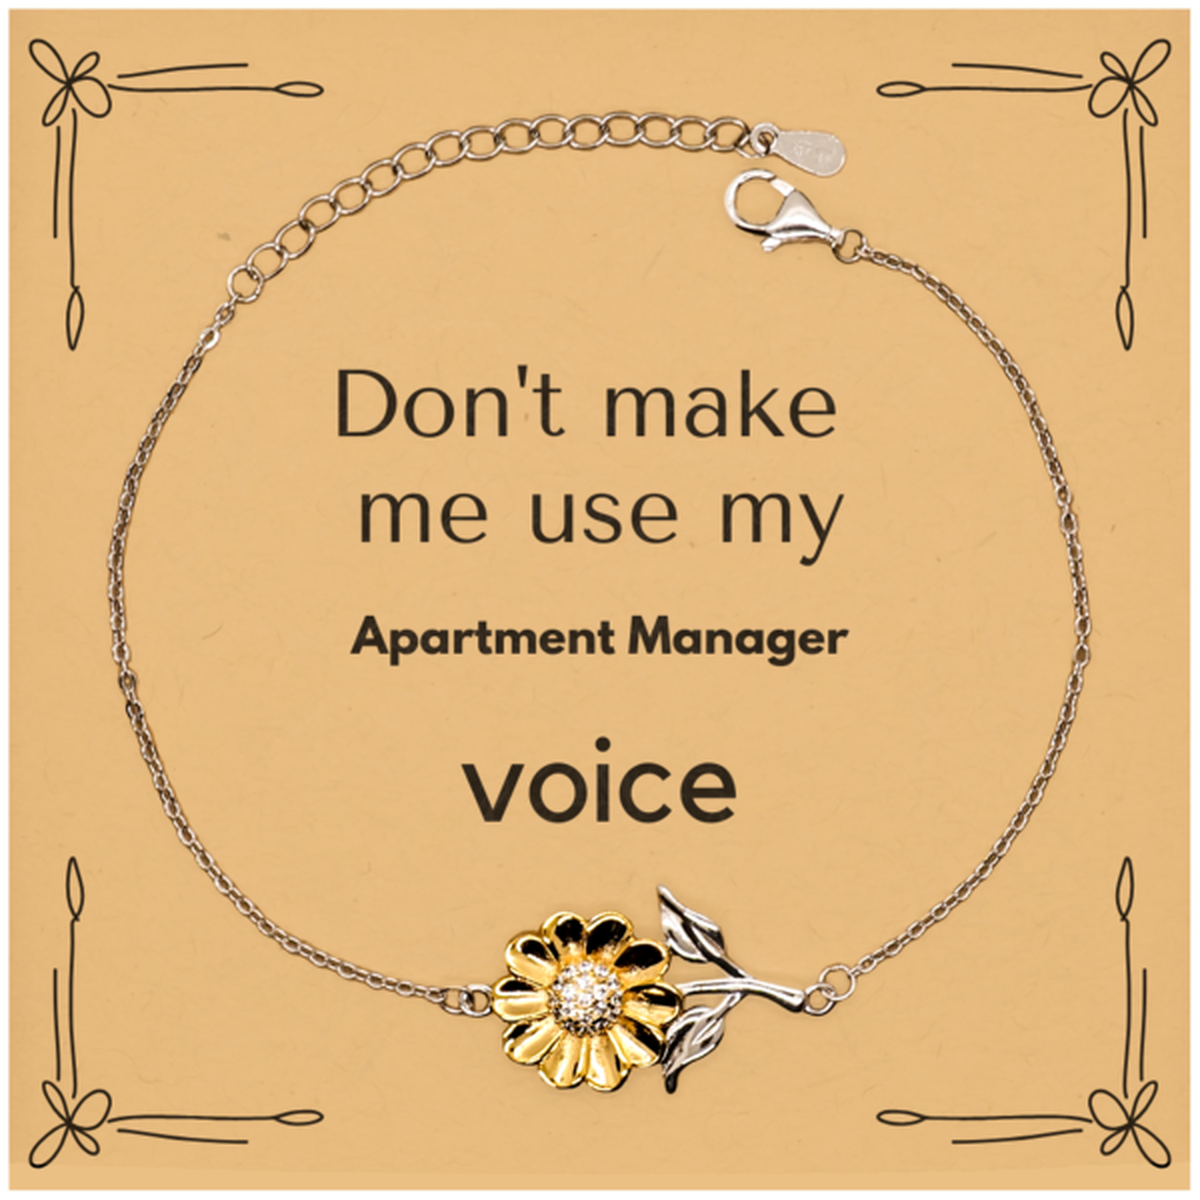 Don't make me use my Apartment Manager voice, Sarcasm Apartment Manager Card Gifts, Christmas Apartment Manager Sunflower Bracelet Birthday Unique Gifts For Apartment Manager Coworkers, Men, Women, Colleague, Friends